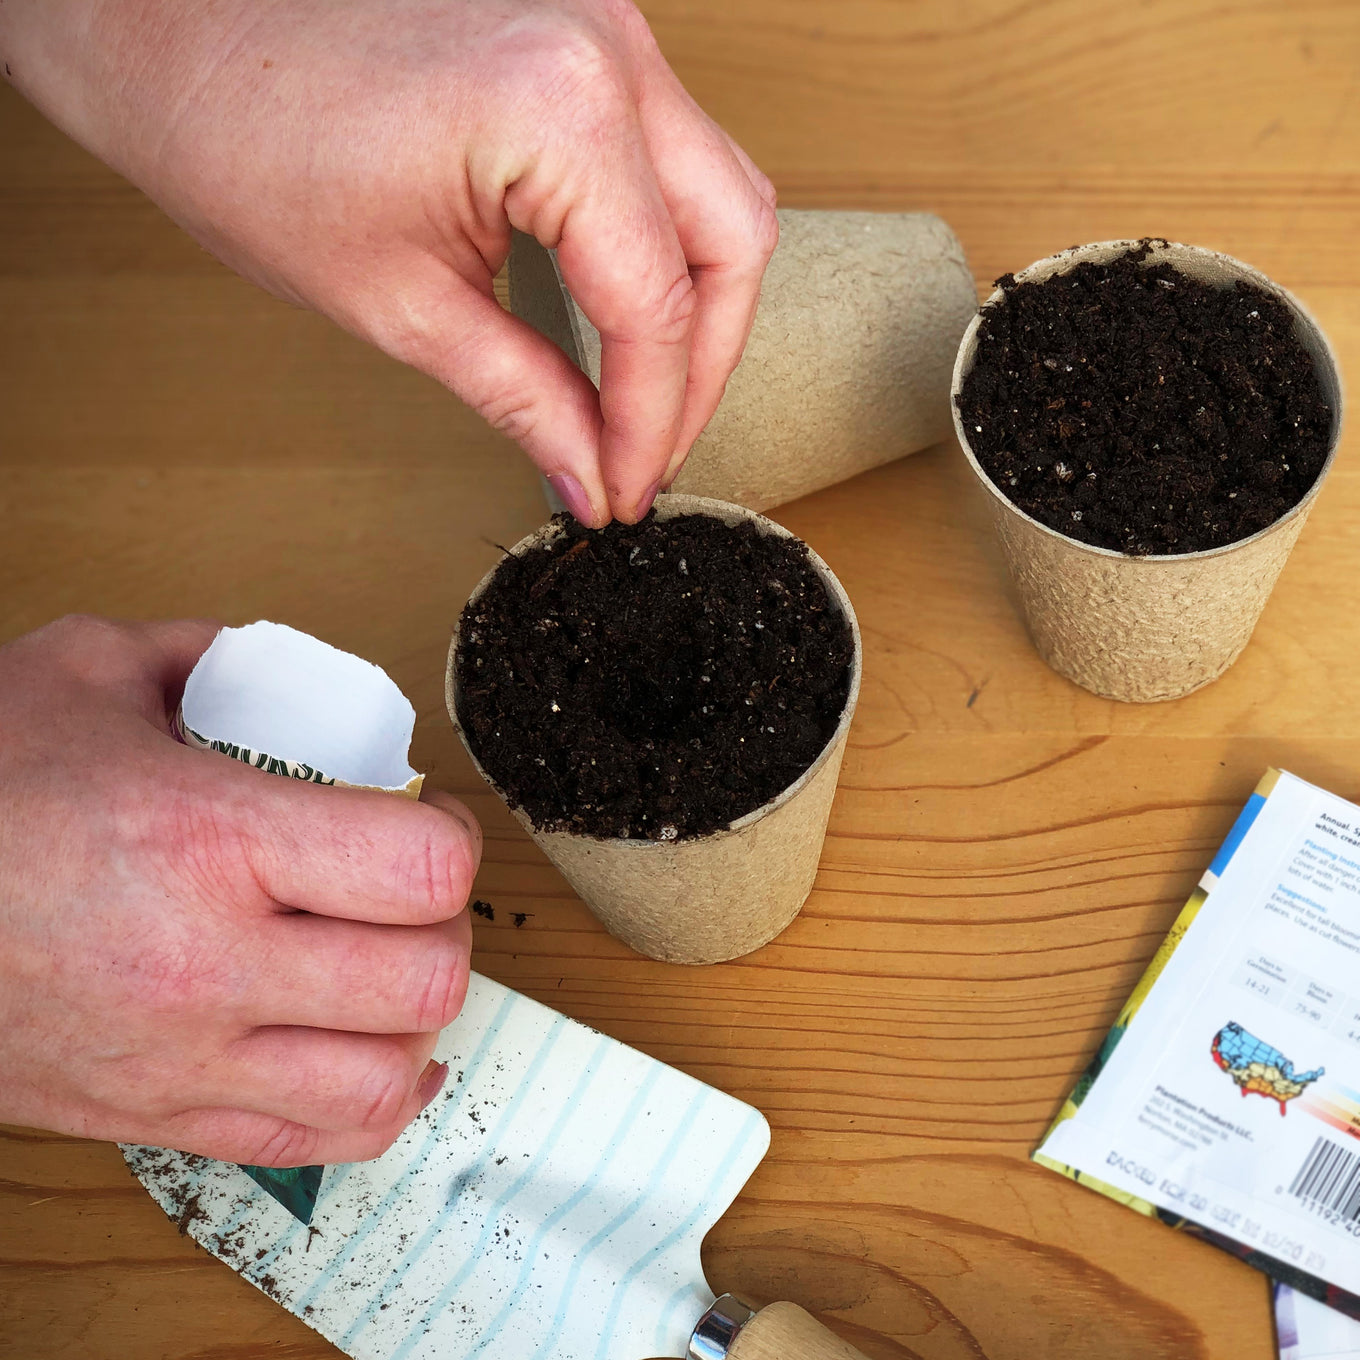 Start Alpine Strawberry seeds in biodegradable paper or peat pots.